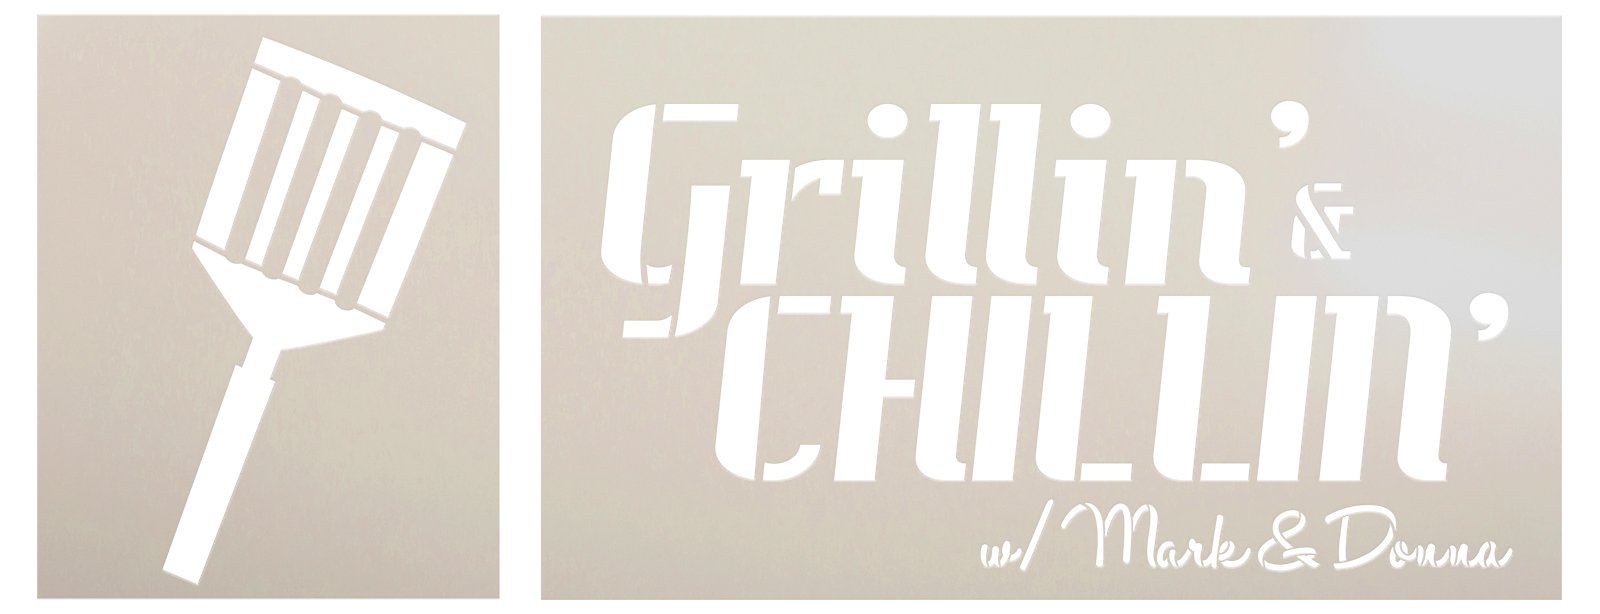 Personalized Grillin' Chillin' with Spatula 2 Part Stencil by StudioR12 - Select Size - USA Made - Craft Backyard & Patio DIY Home Decor | Paint Custom Name Wood Sign